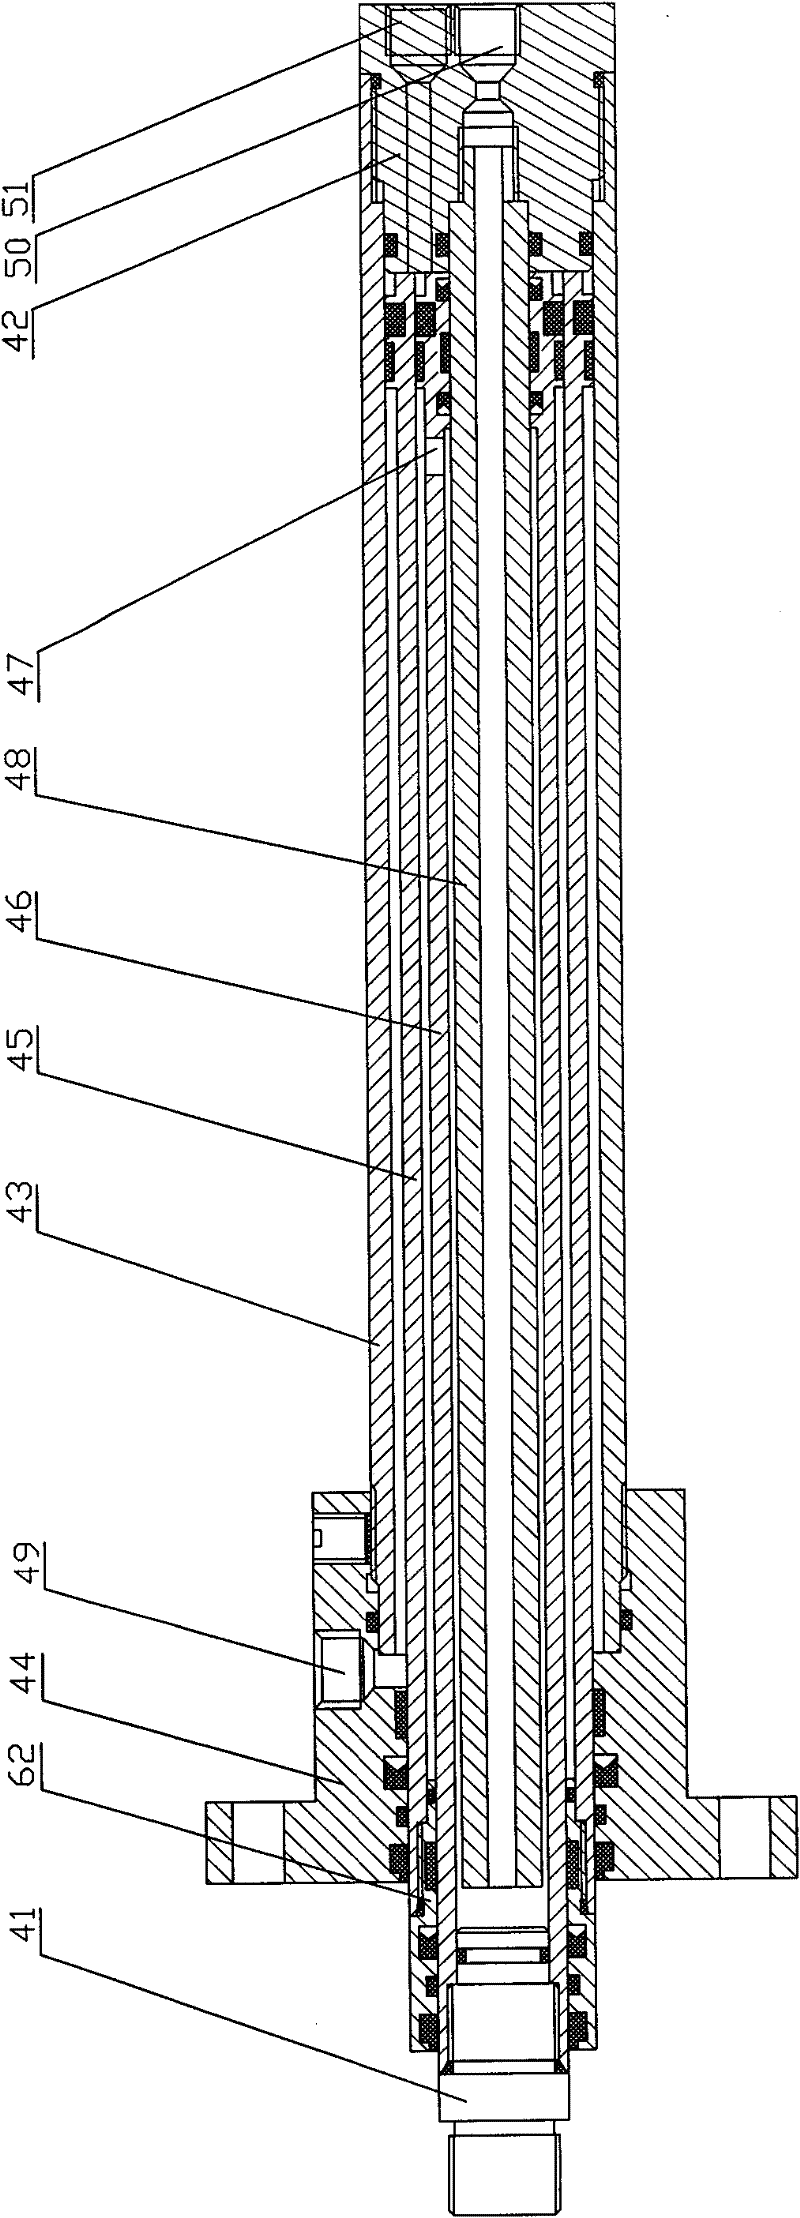 Hydraulically driving seabed multi-column shaped sampling and sealing system